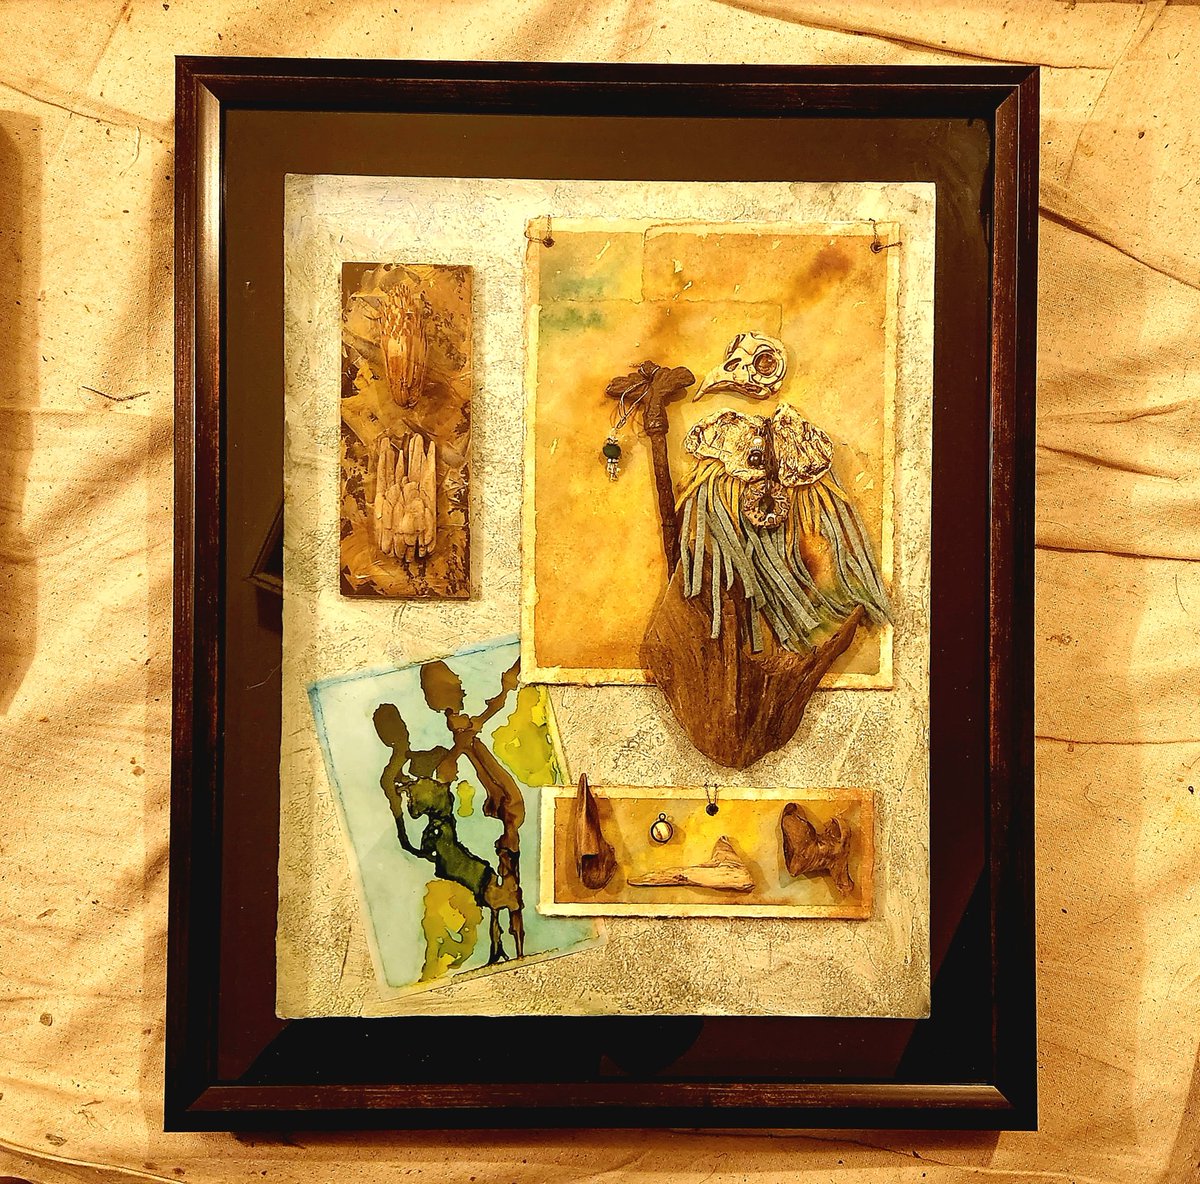 The Avian King of the Ethereal Realm  is born and framed. #mixedmedia #NFTs #pastels #foundobjects #watercolorart